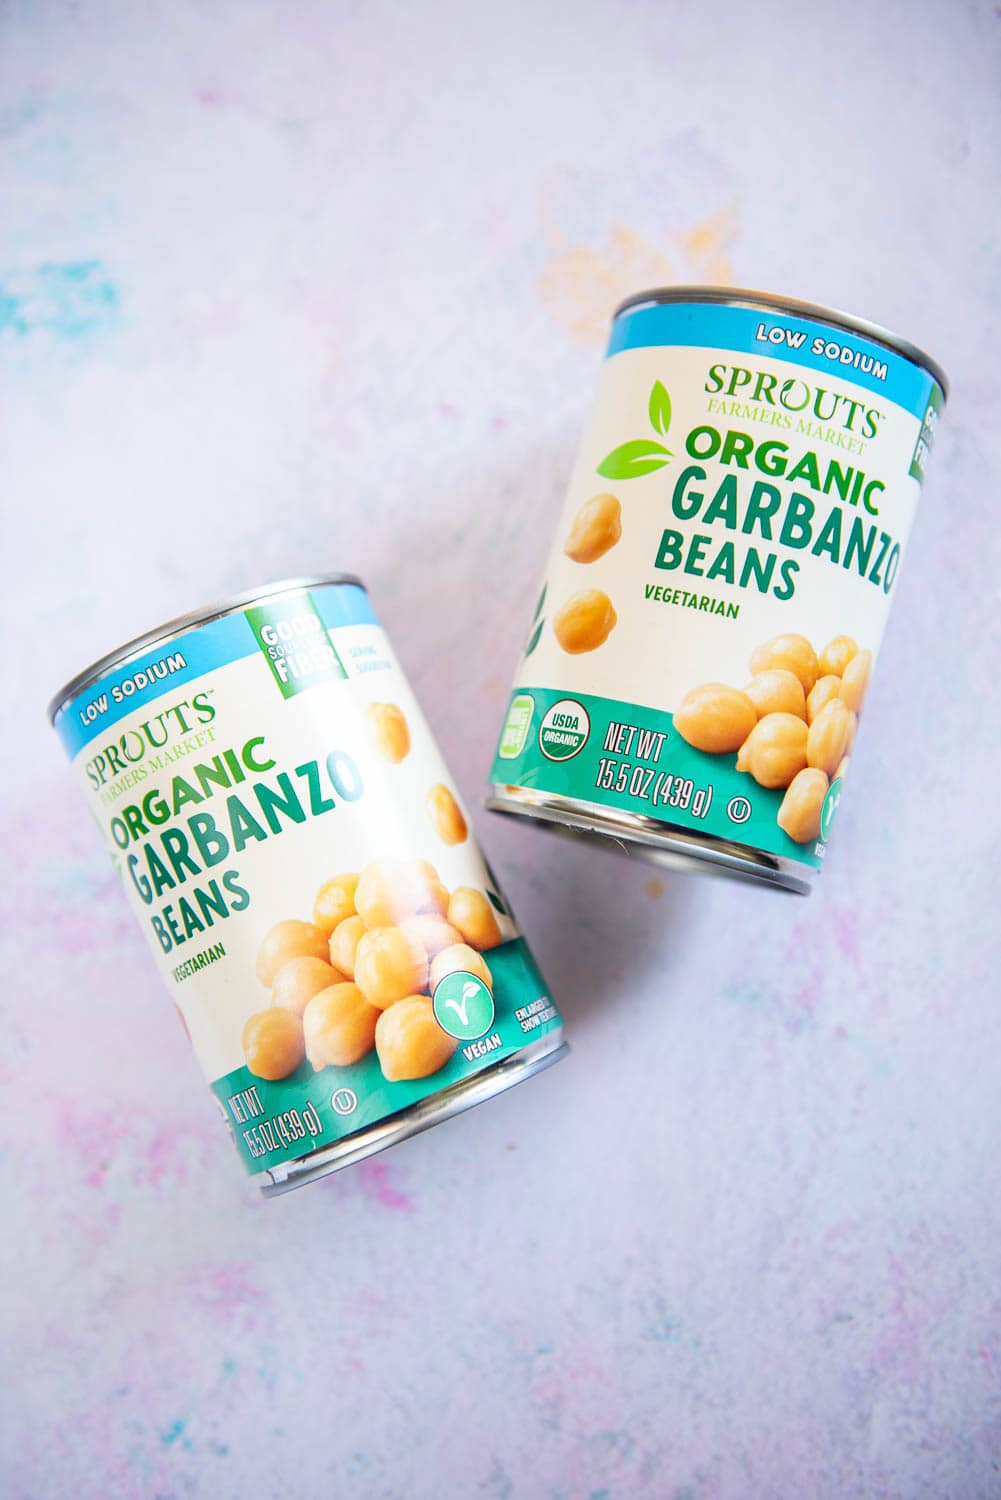 2 cans of garbanzo beans